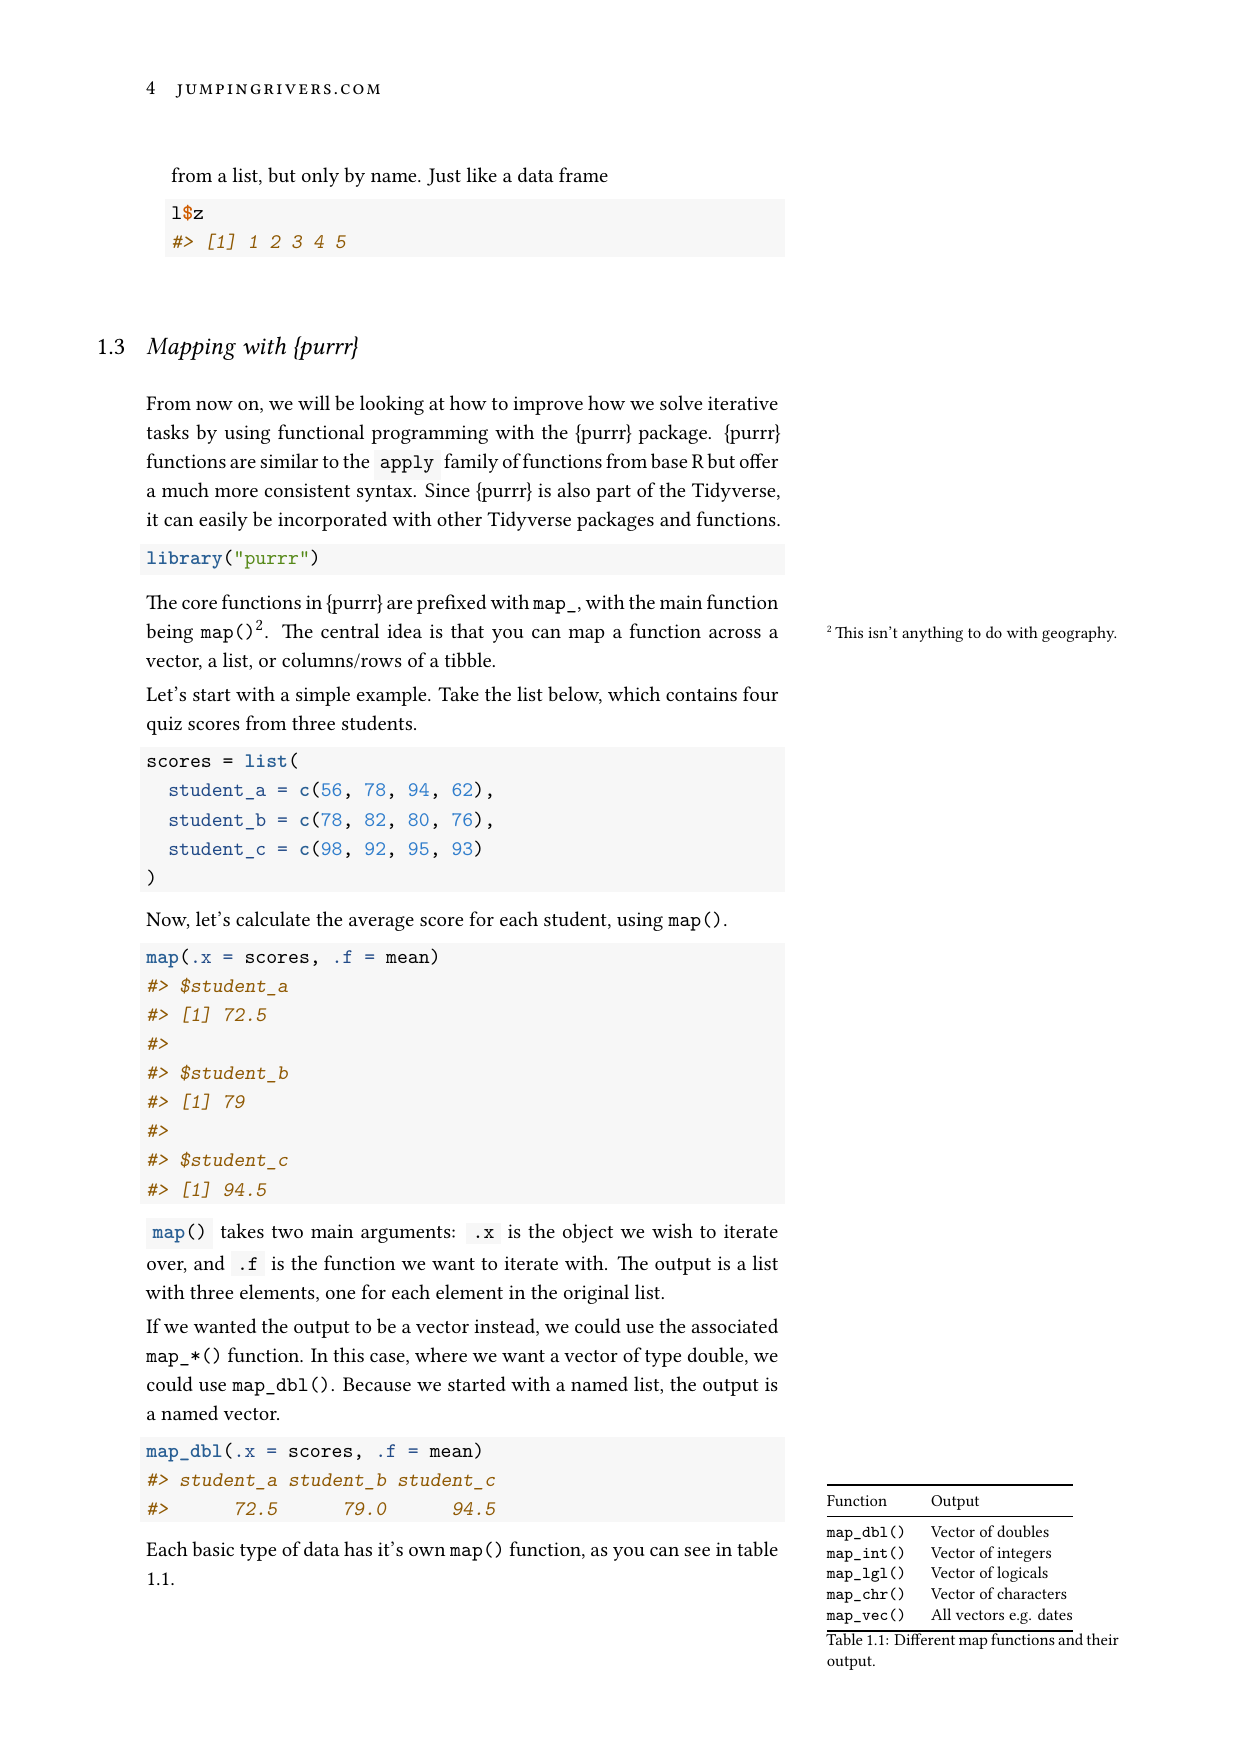 Page 4 of example course material for  Functional Programming with {purrr}